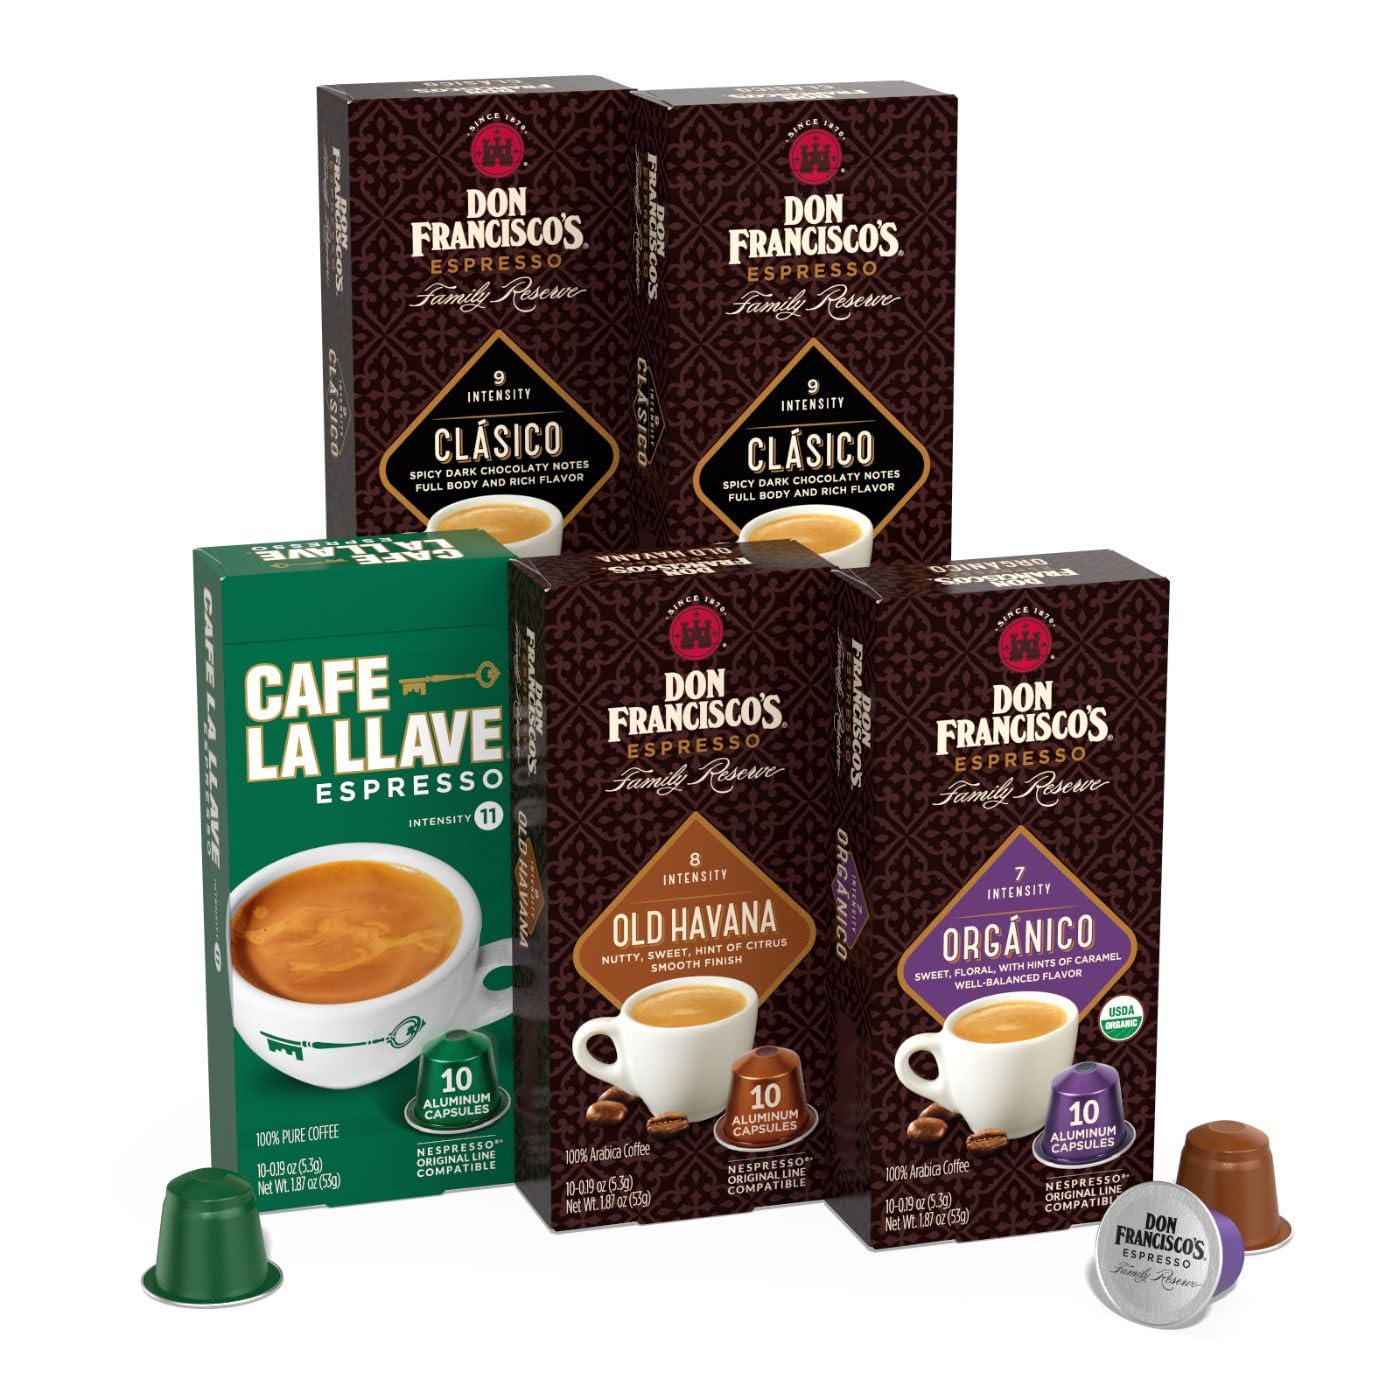 Don Francisco' and Cafe La Llave Espresso Capsule Variety Pack - 50 Count Aluminum Recyclable Pods, Compatible with Original Nespresso Machines